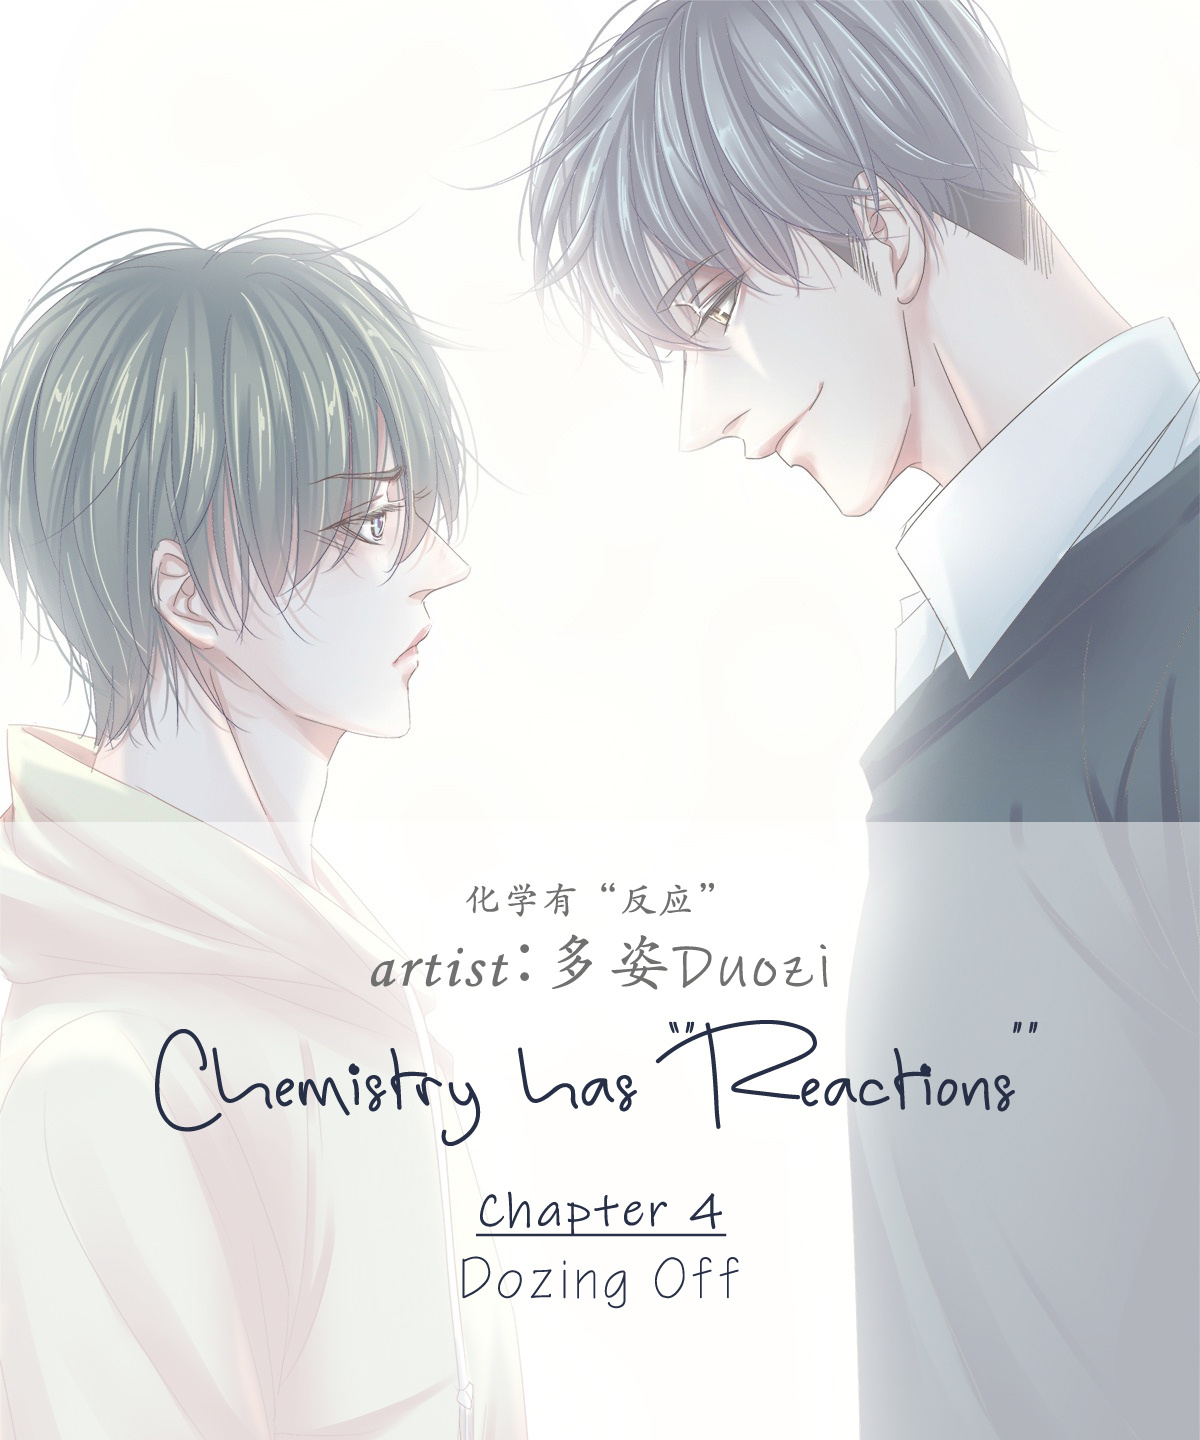 Chemistry Has "reactions" Chapter 4 #1